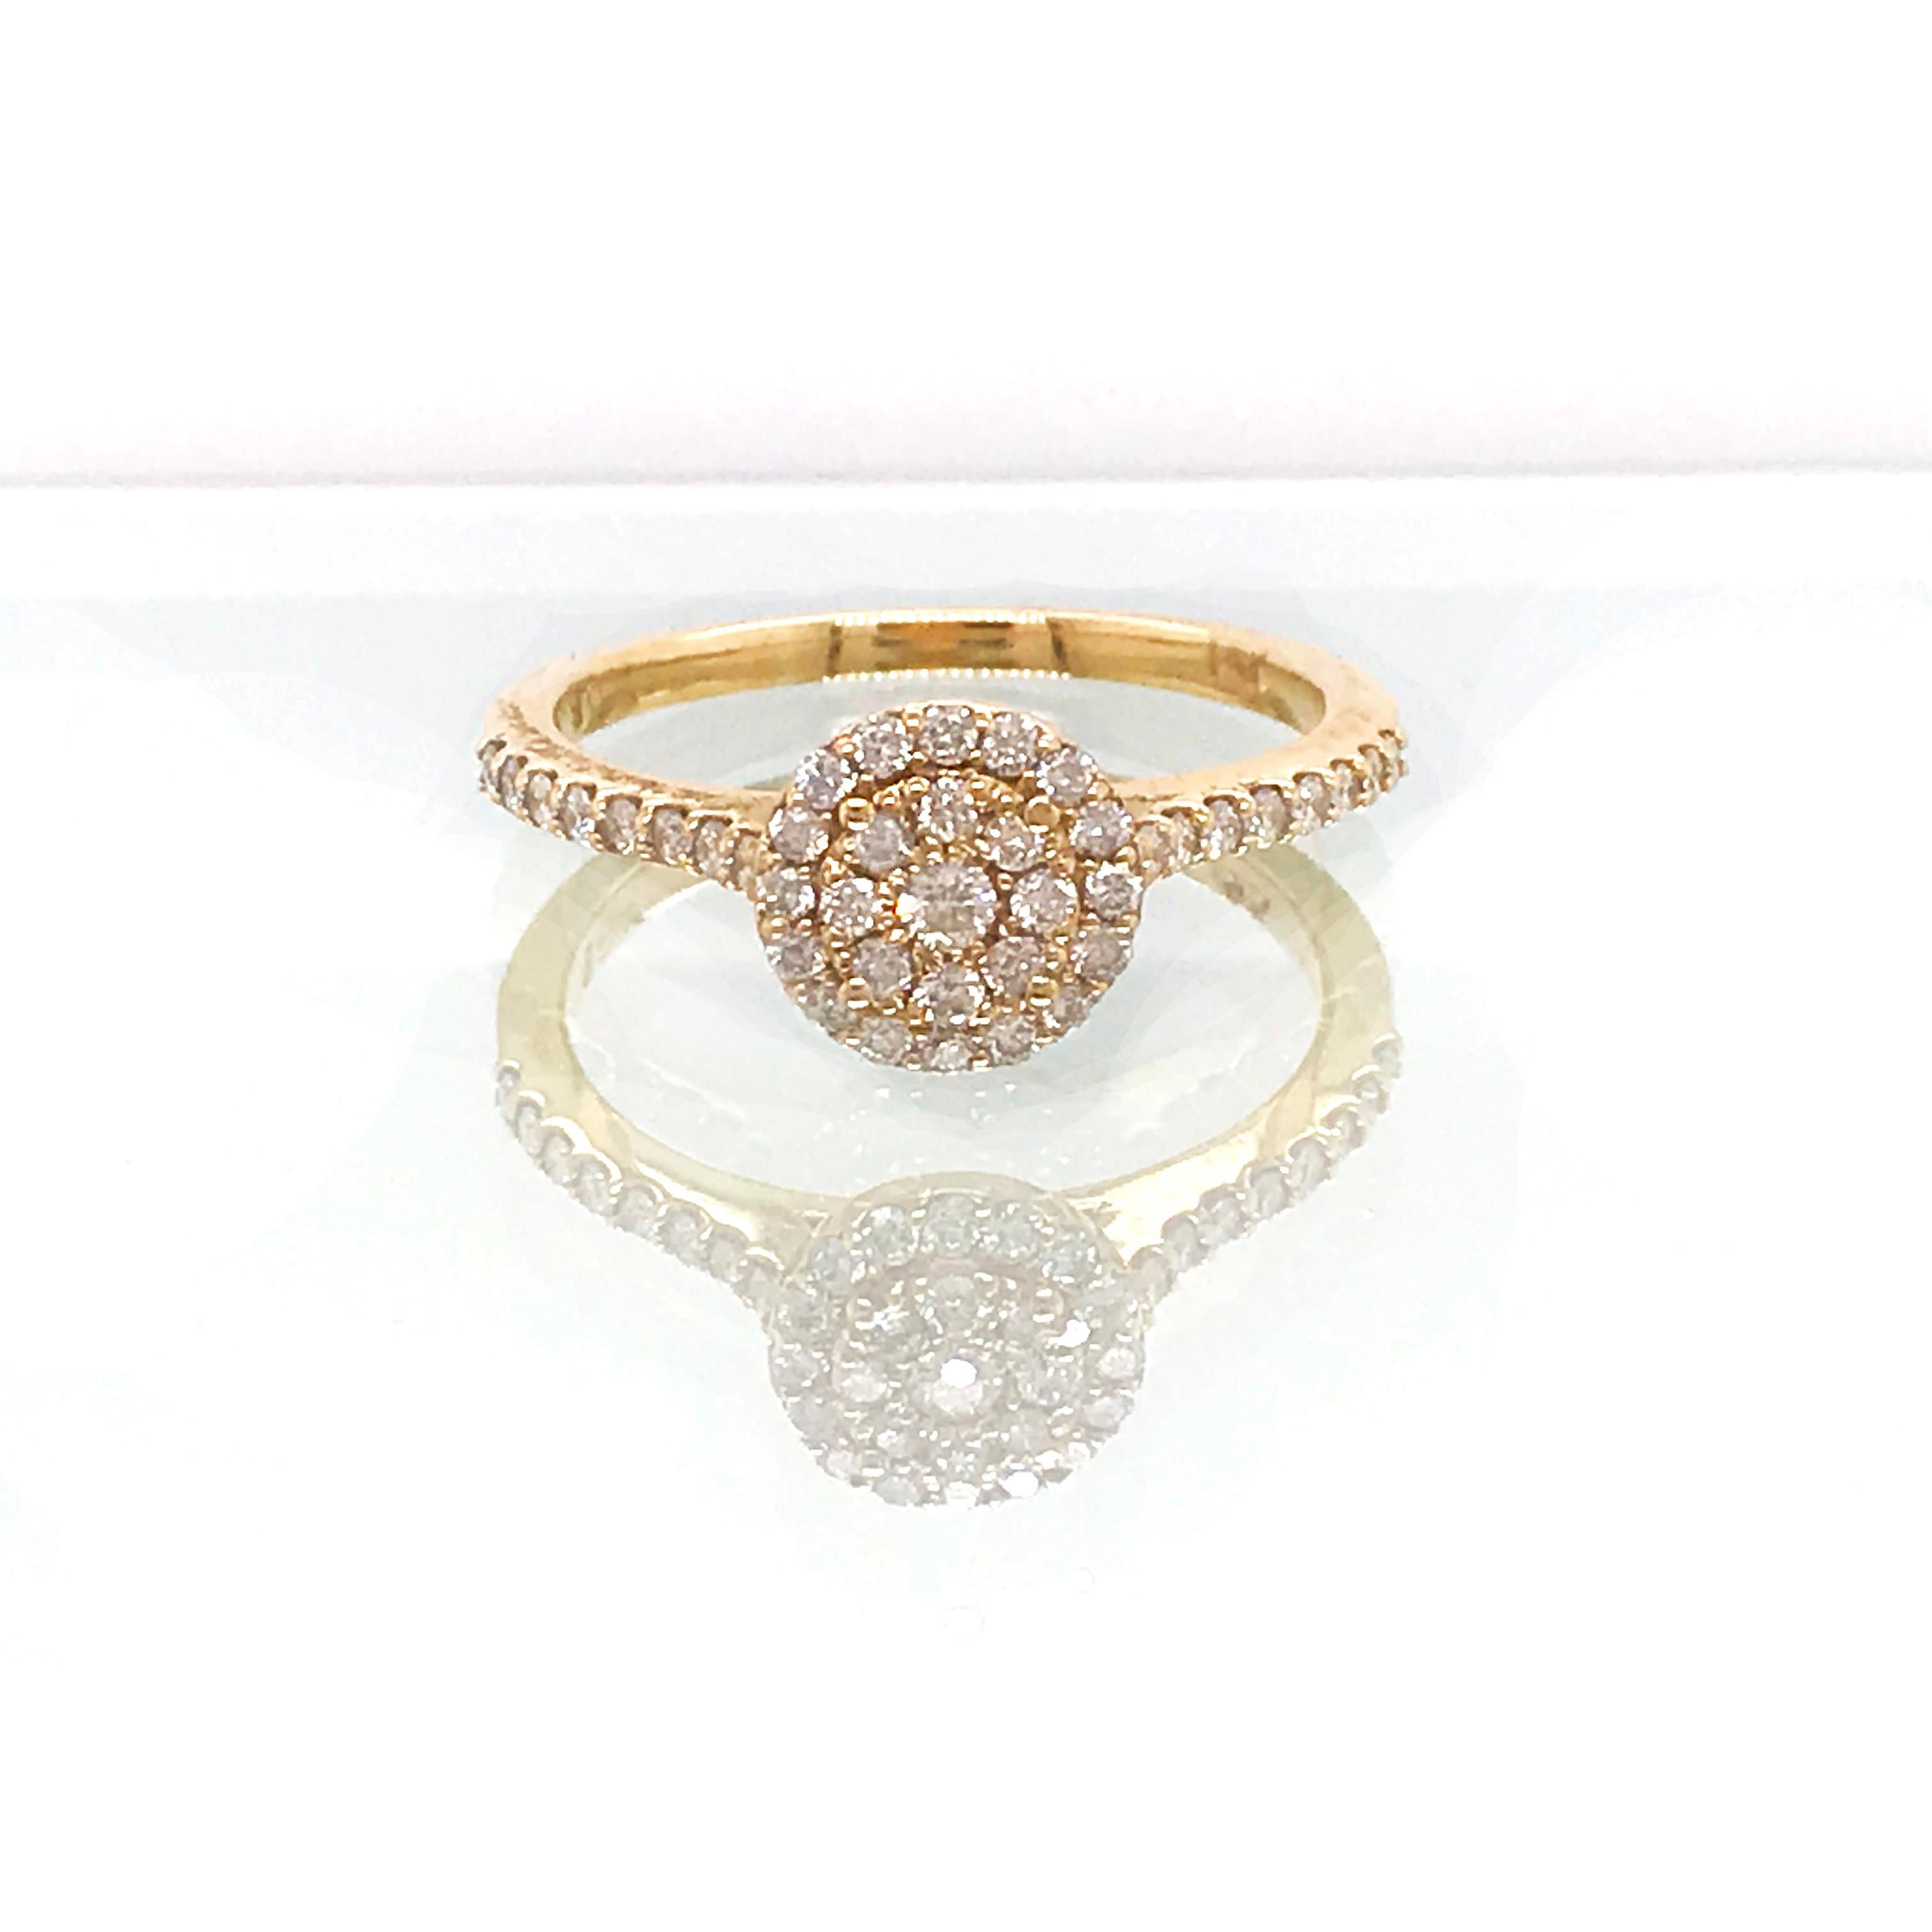 Diamond cluster ring in 14 karat yellow gold!
With 0.50 carat total diamond weight! Half a carat diamond ring! 
There is a lovely diamond cluster top with diamonds going half way around the band! This ring sparkles from every angle! 
This setting is